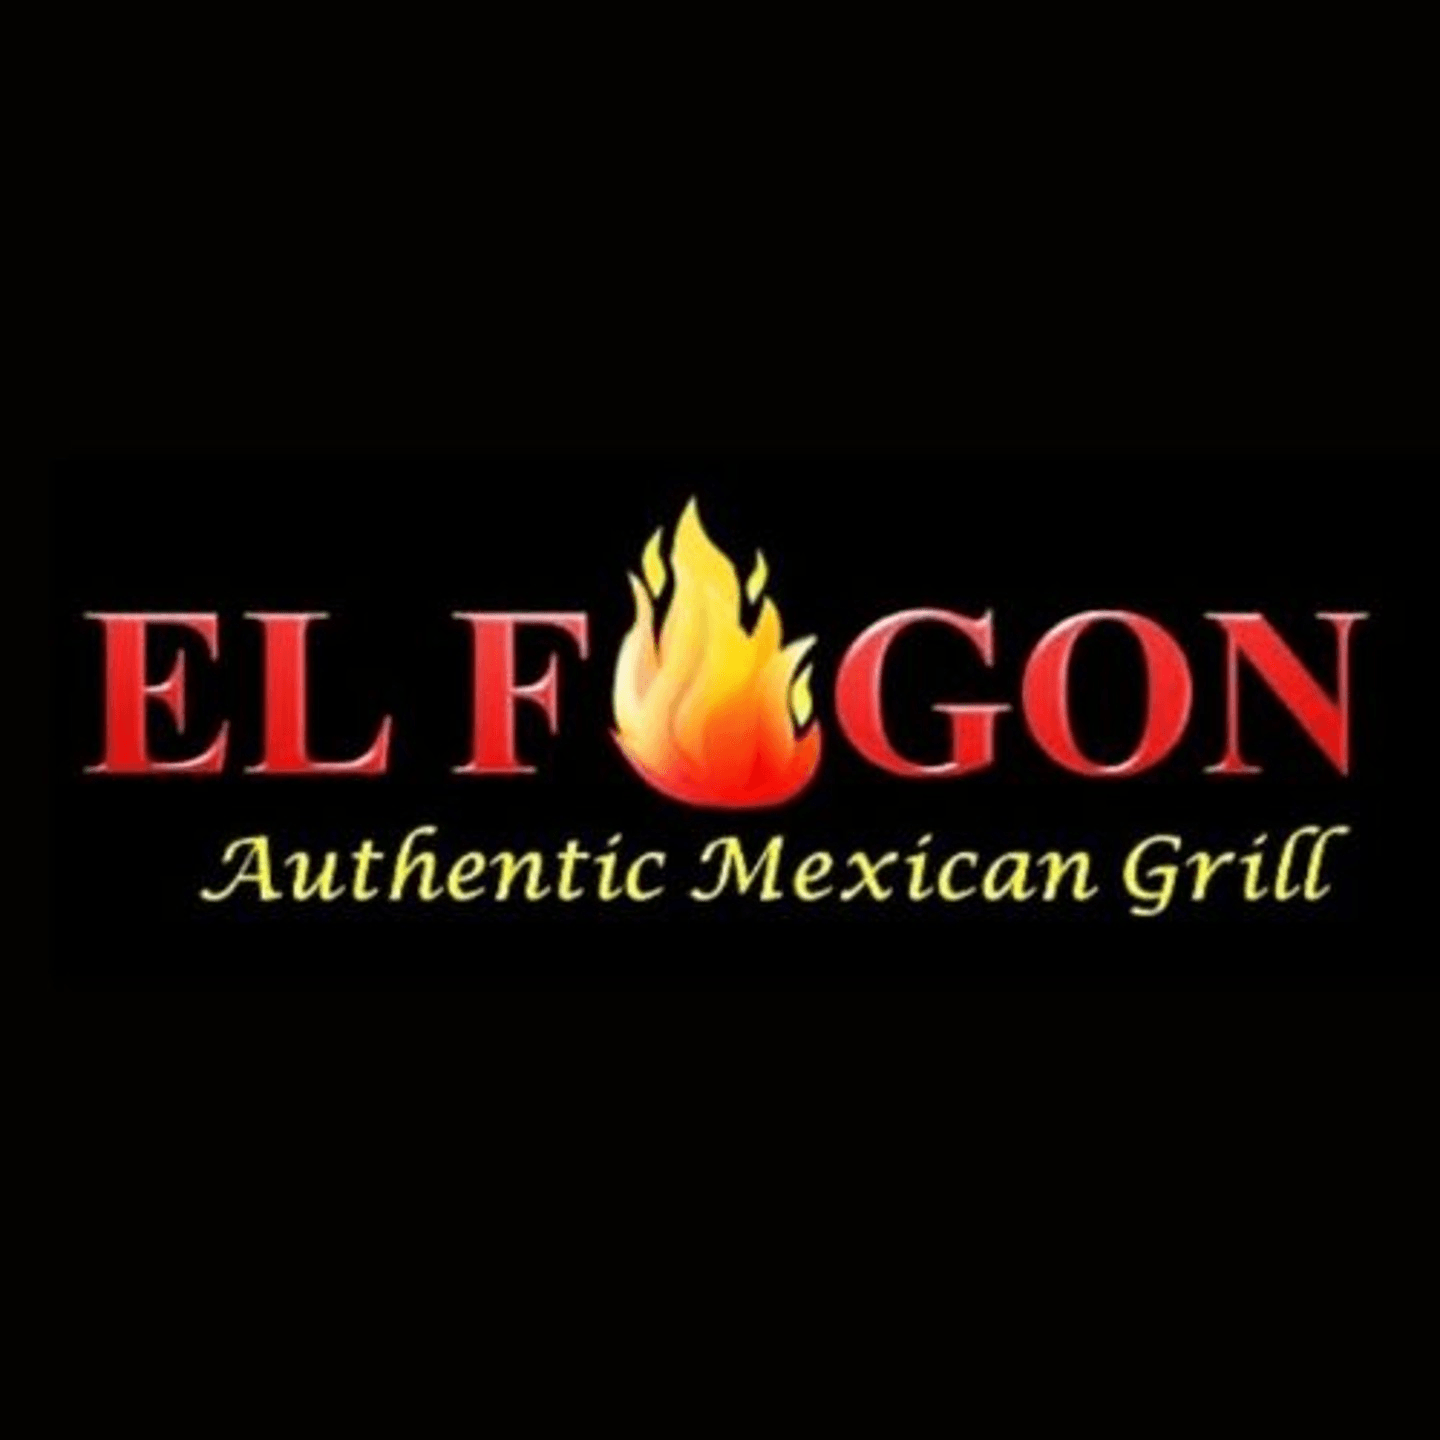  Welcome to El Fogon Authentic Mexican Grill!